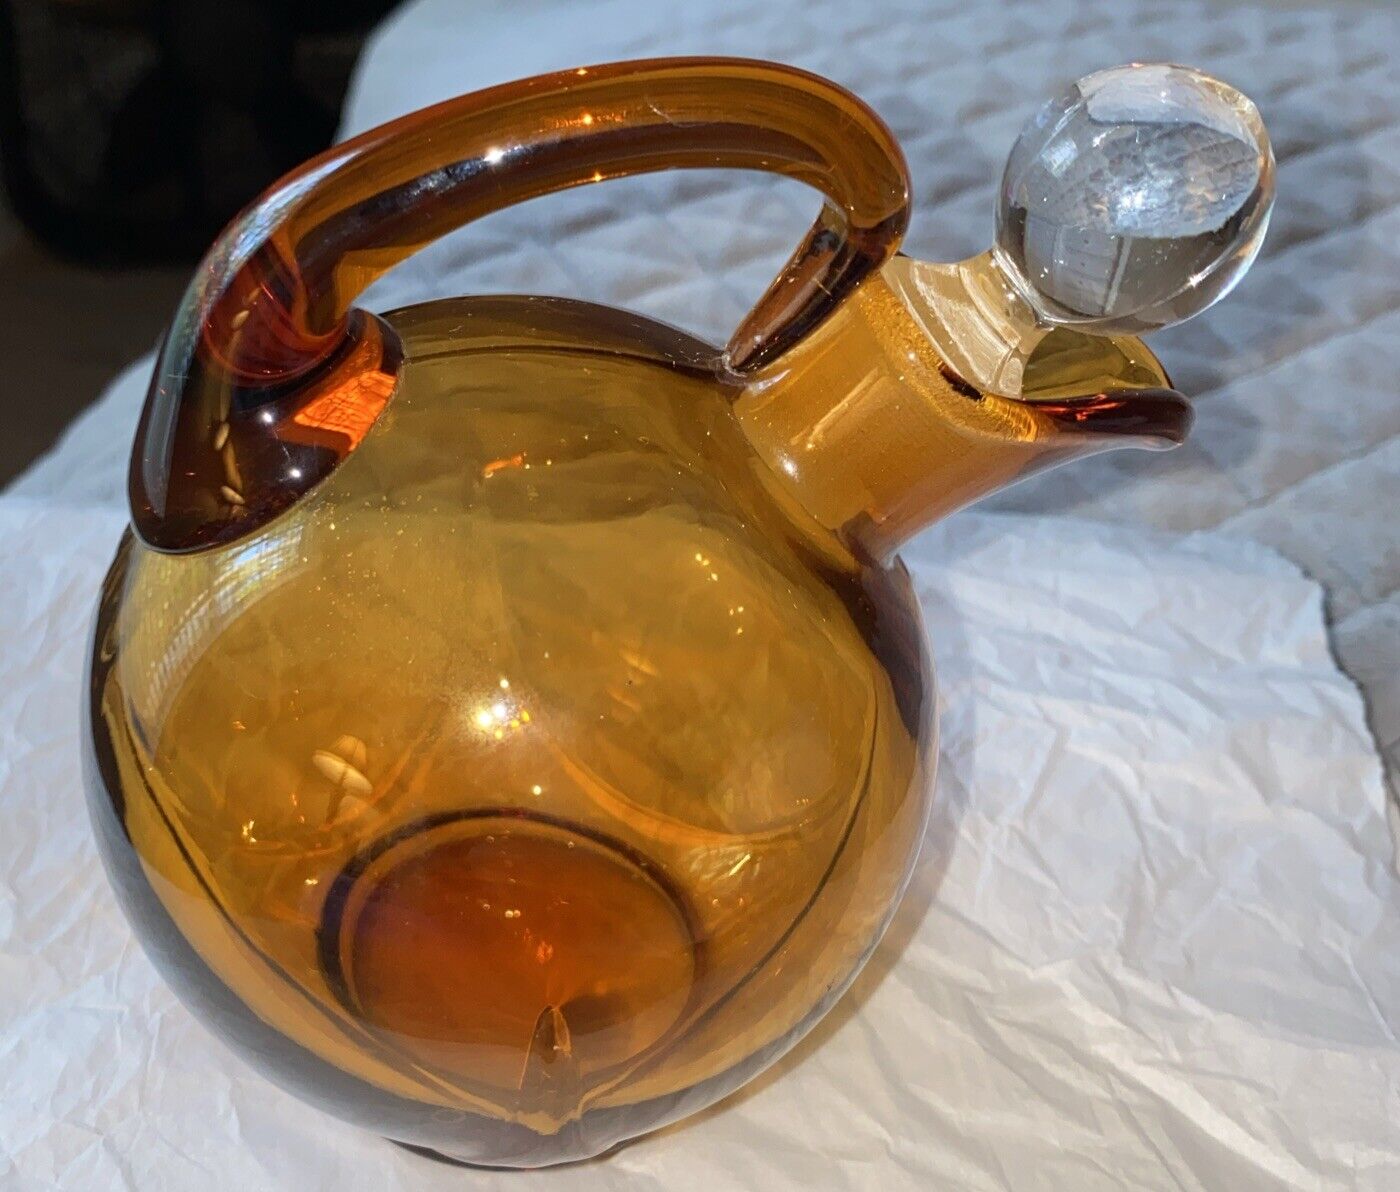 Vintage 1930's Cambridge Amber Glass Tilt Decanter with Clear Stopper